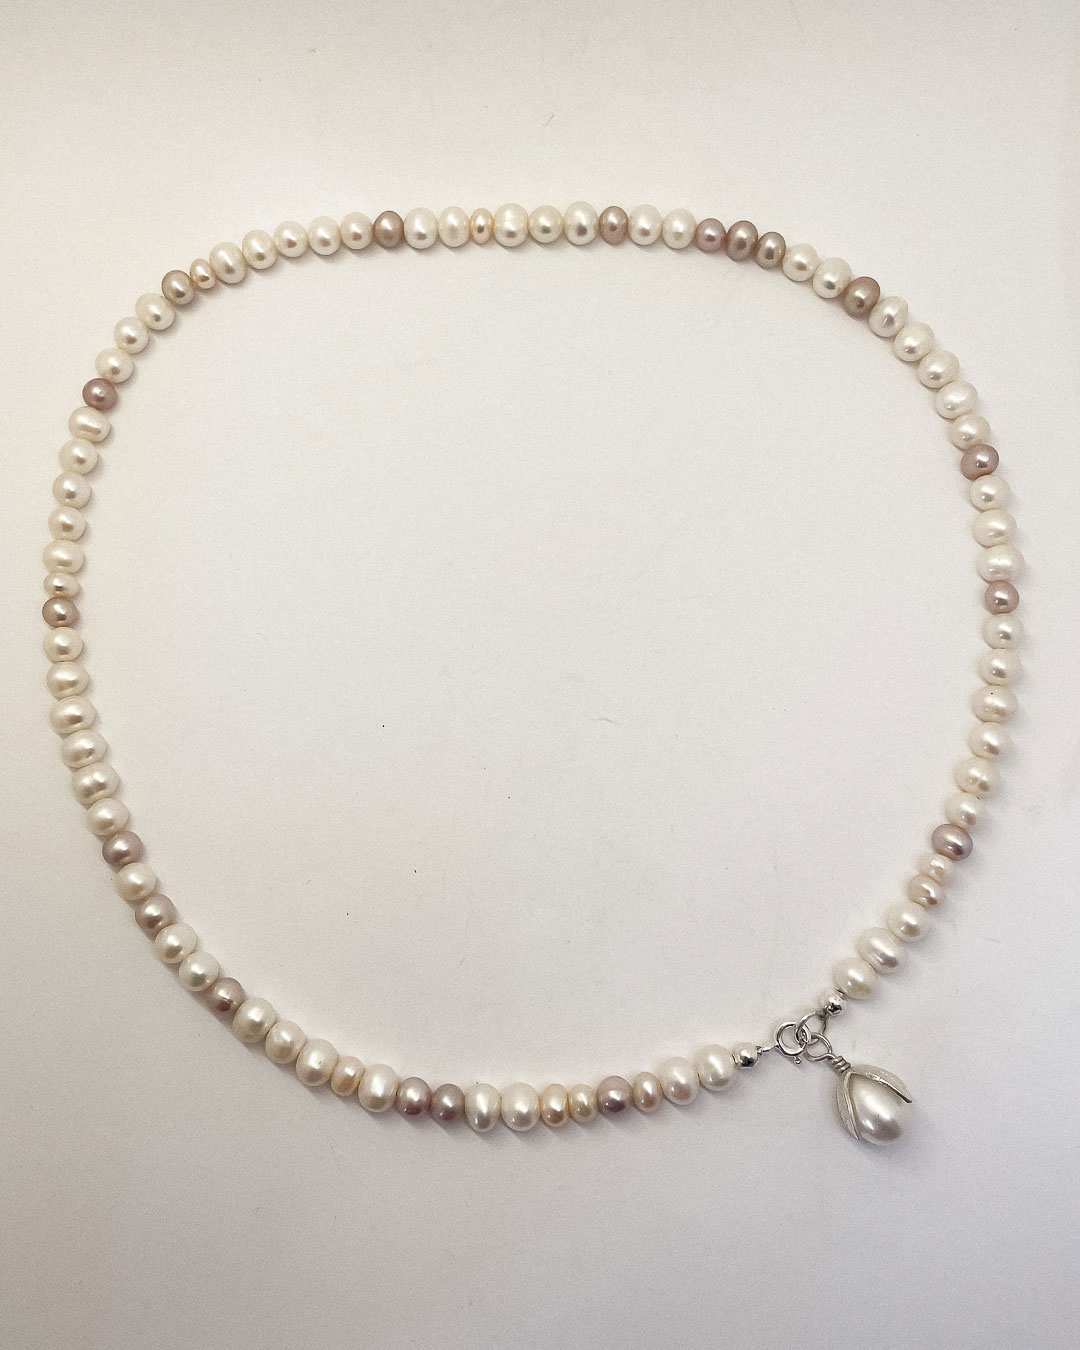 A one-of-a-kind Glow Rice Pearl Mixed Necklace is crafted with Organically-sized round and oval-shaped freshwater pearls - each with their own unique, colour, shape and characteristics with a Pearl pendant